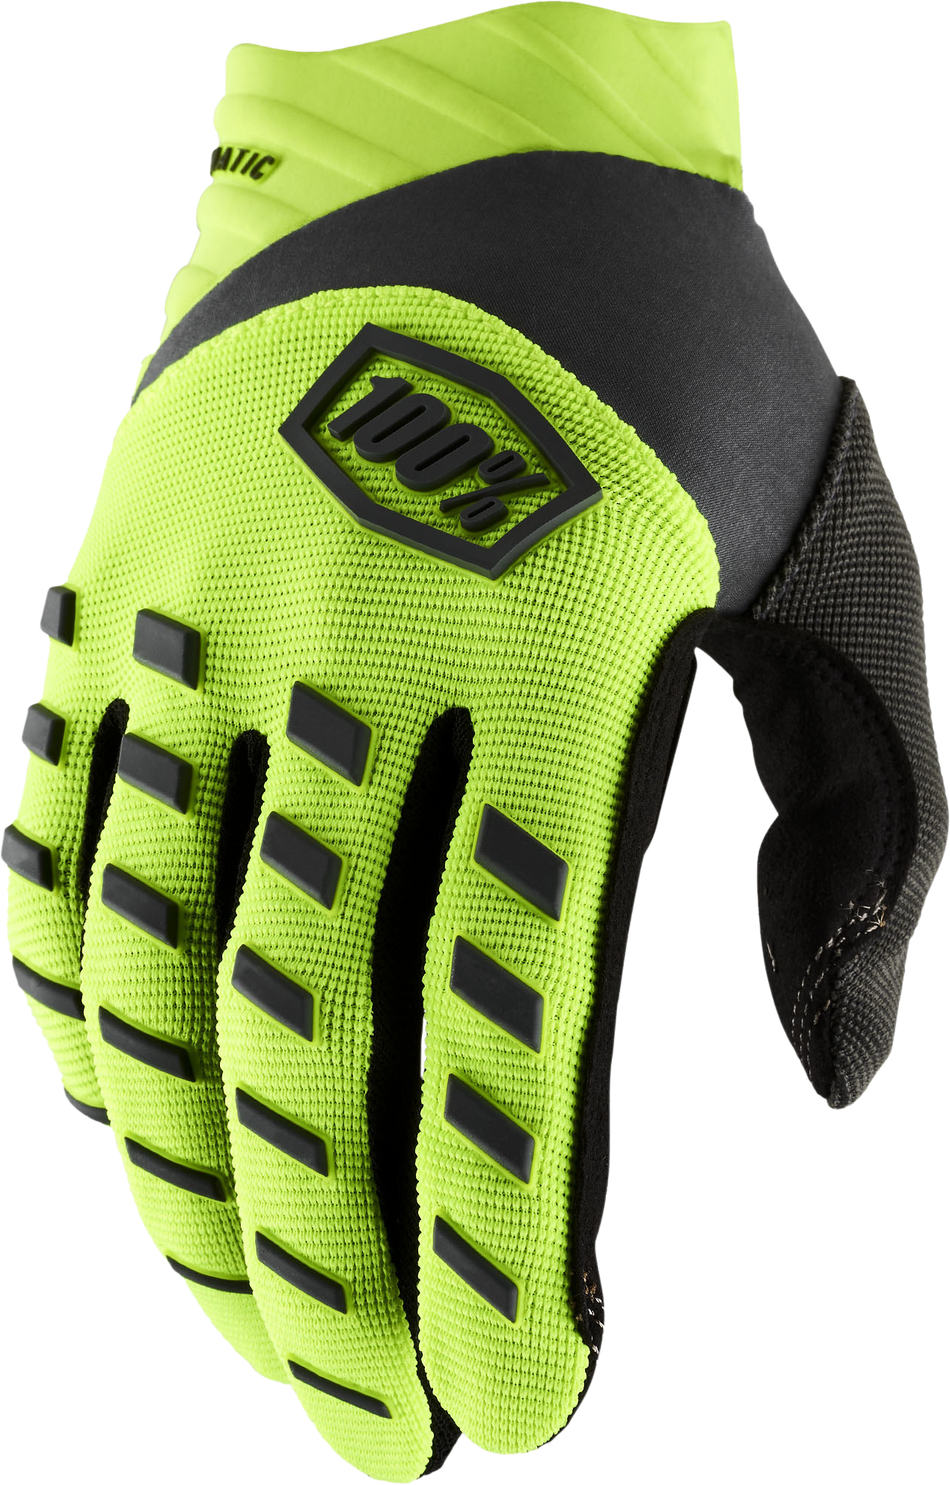 100% Airmatic Gloves Fluo Yellow/Black Lg 10000-00012